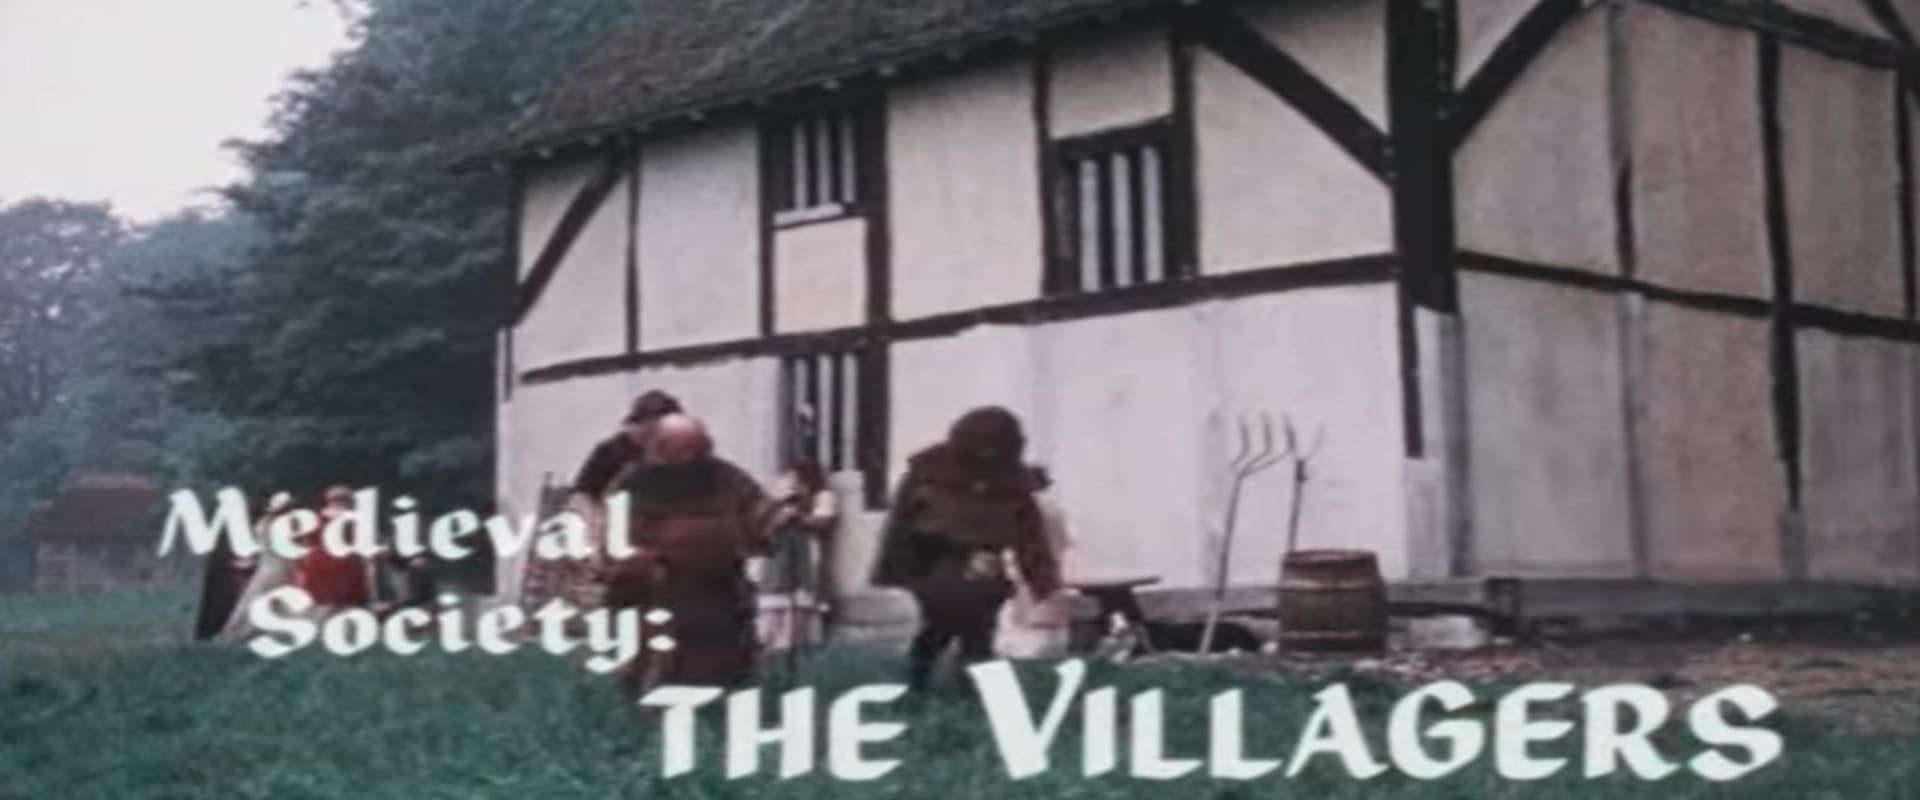 Medieval Society: The Villagers